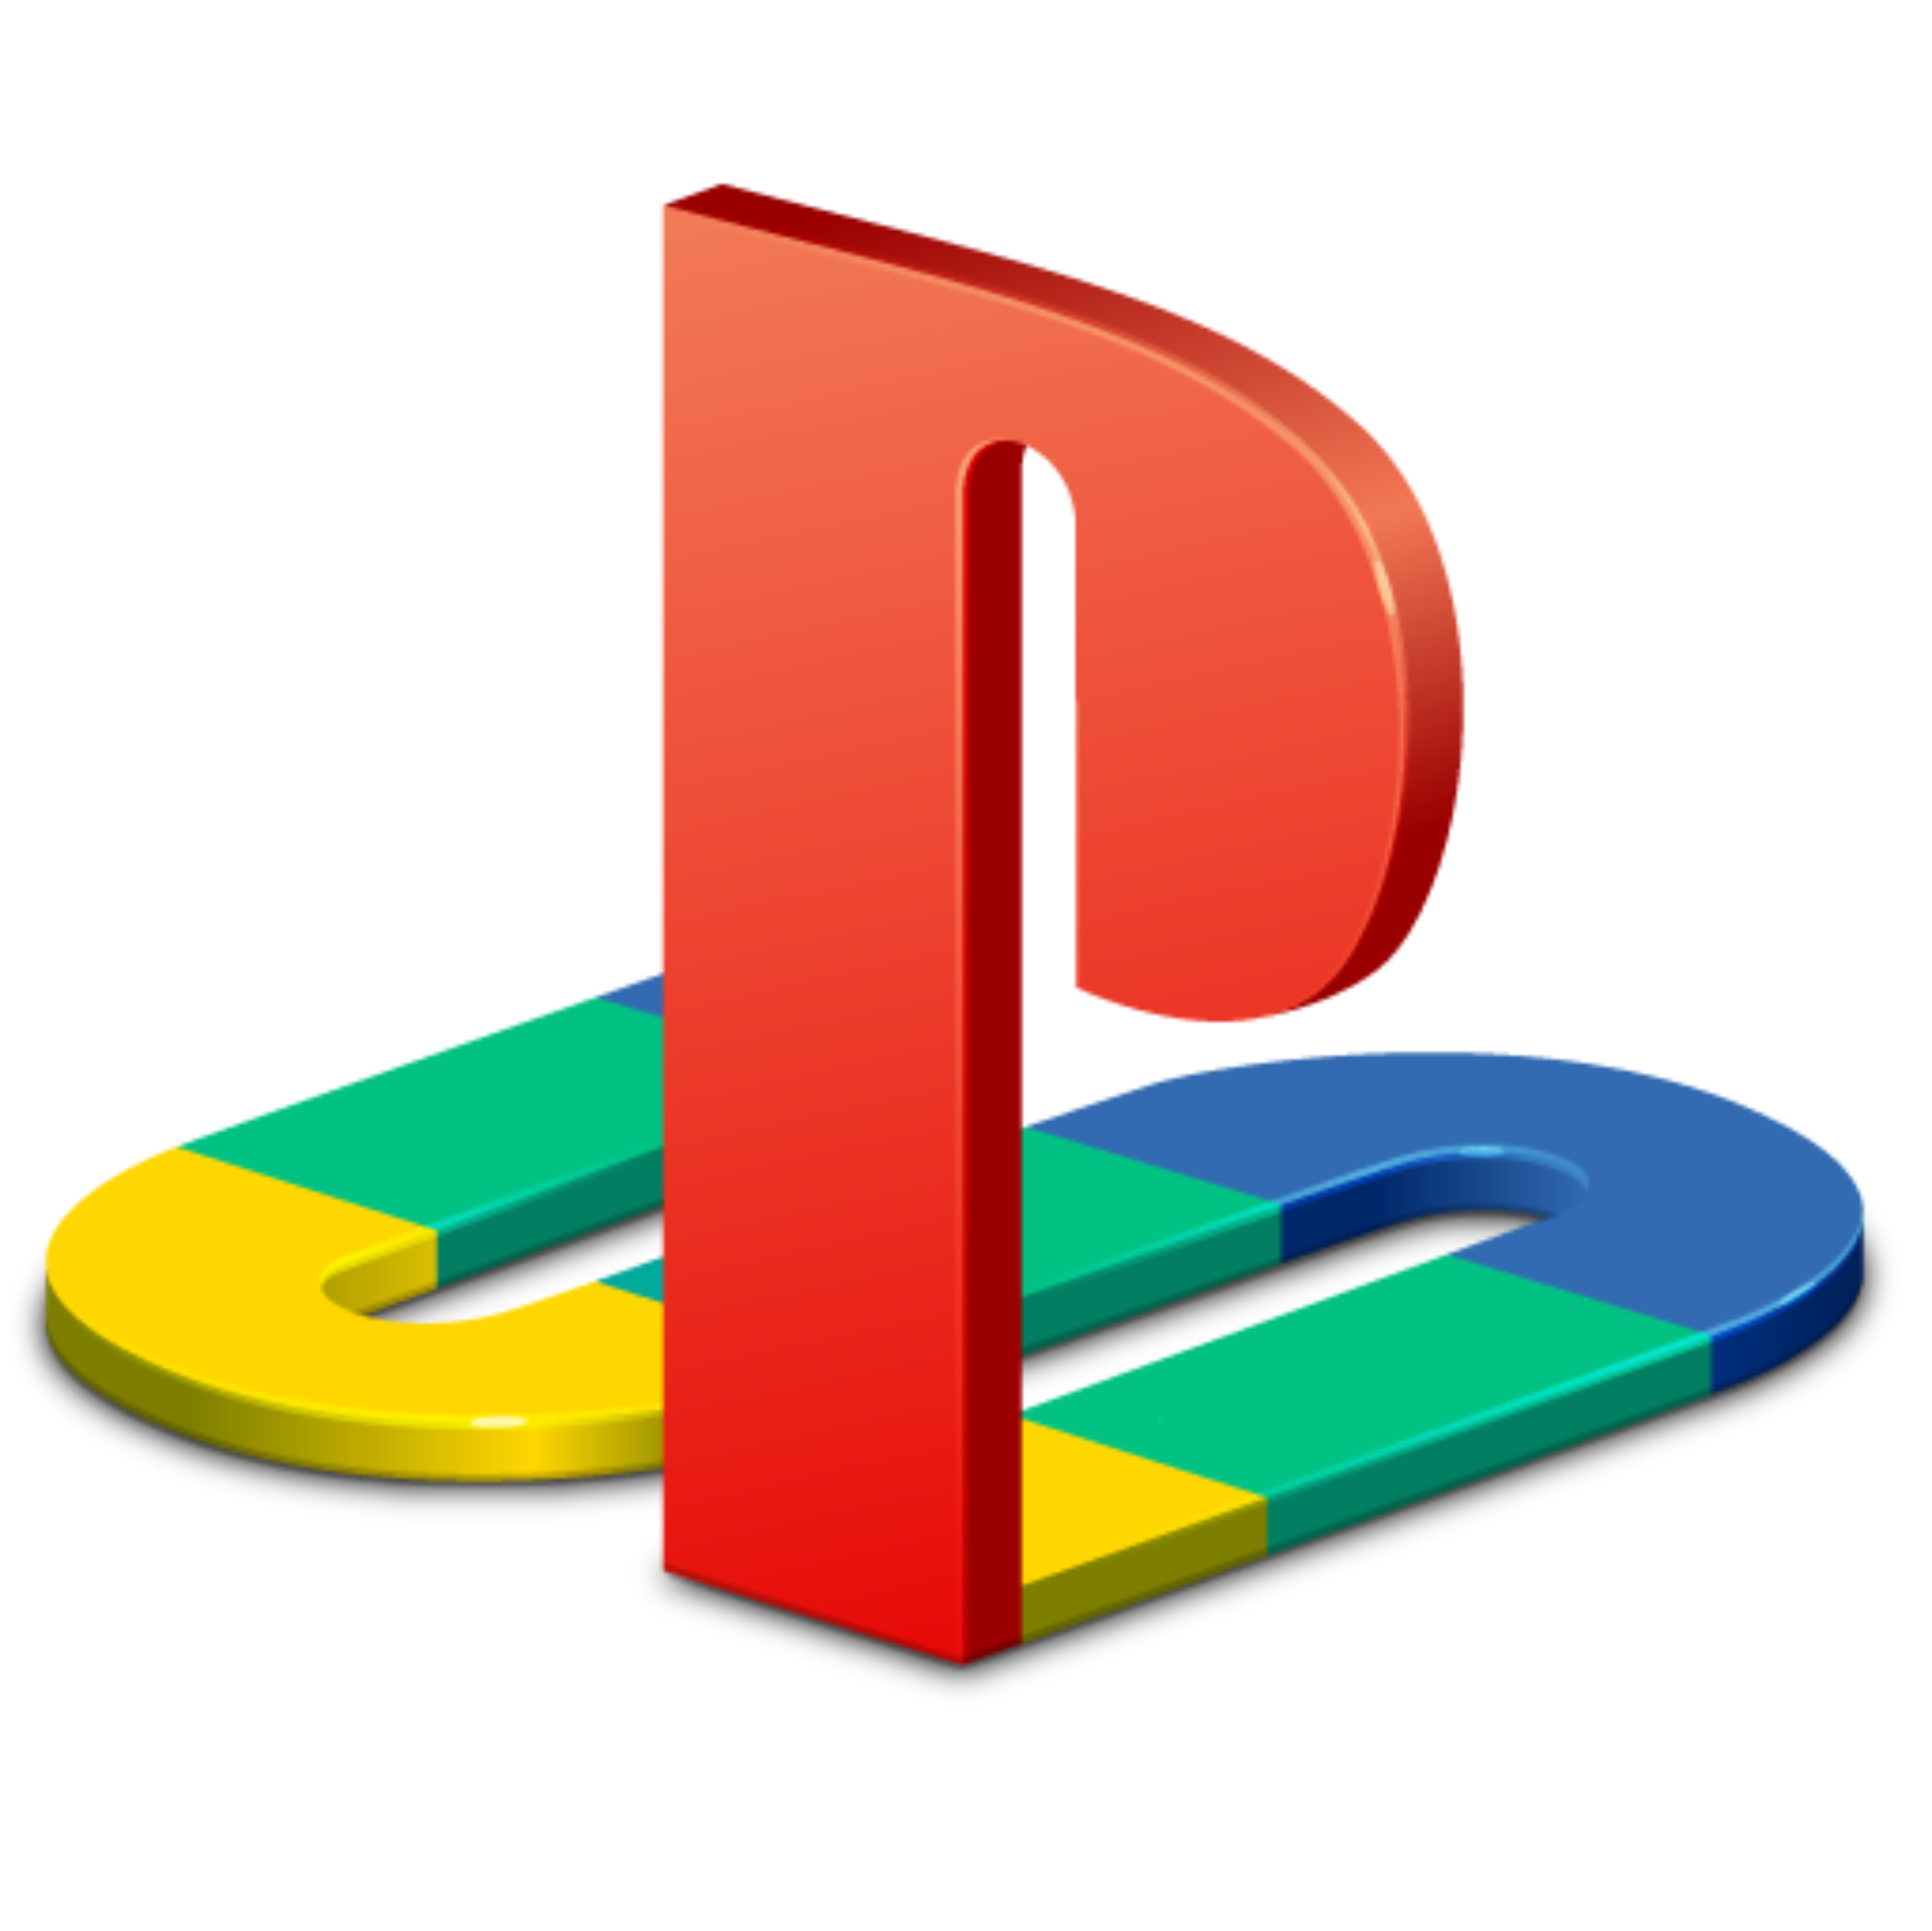 Playstation icon. Значок ps1. Ps3 ps4 logo. Иконка PLAYSTATION 1. PLAYSTATION надпись.